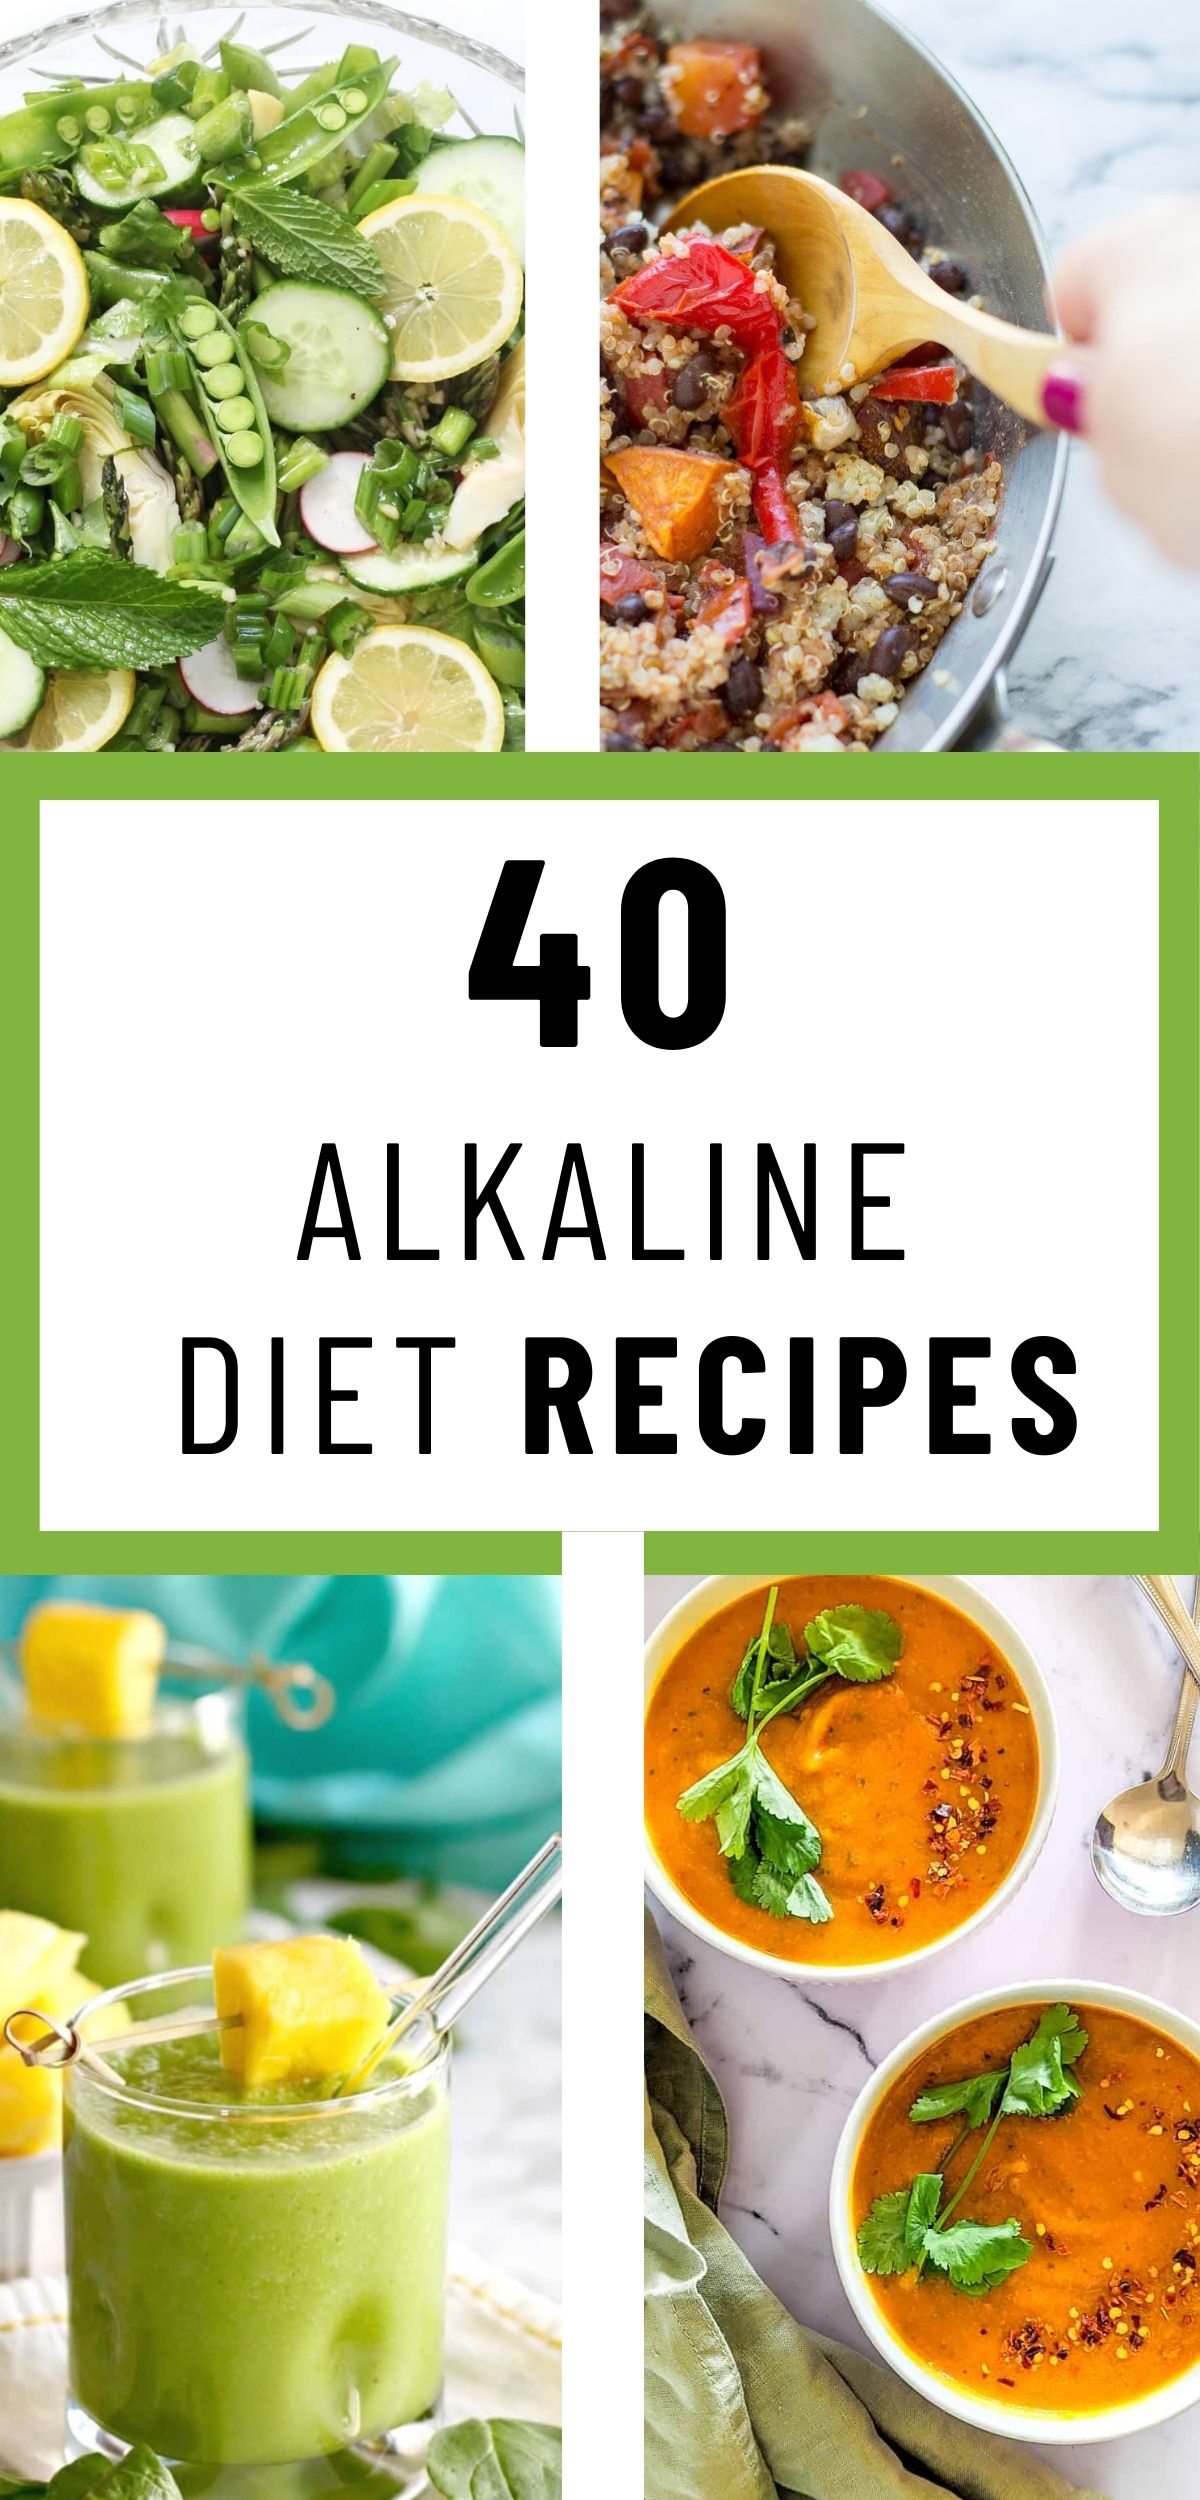 40 Easy Alkaline Diet Meal Plan Recipes for Beginners - Intentionally Eat